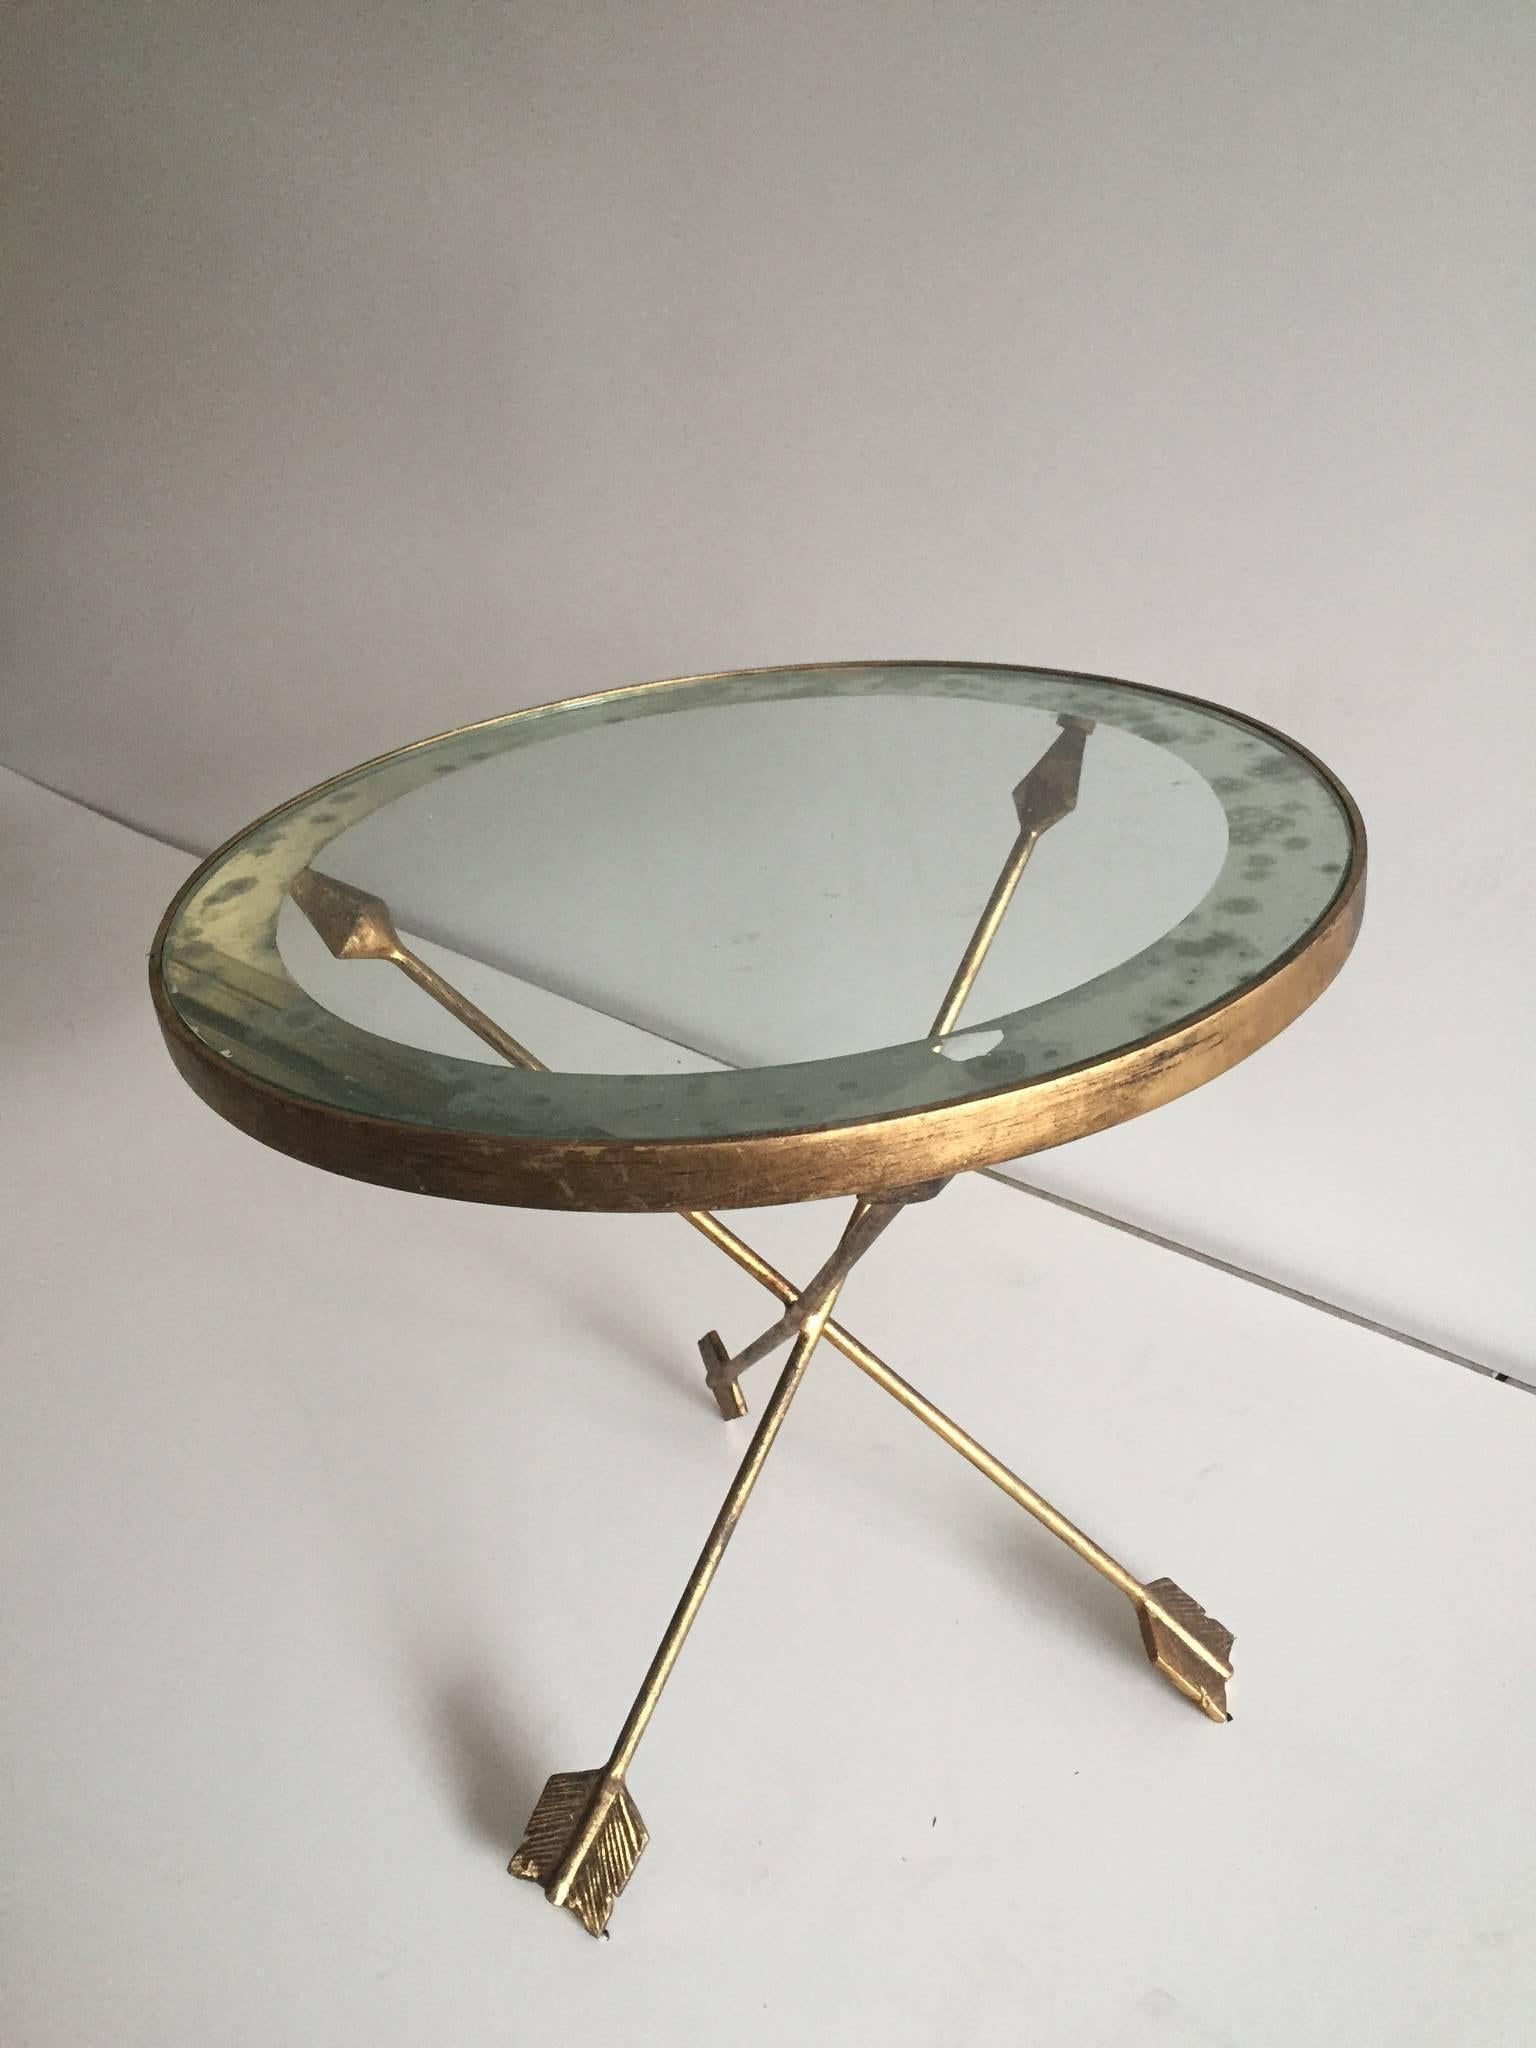 A French, brass end or side with arrow bases and circular glass top inspired by Maison Jansen.